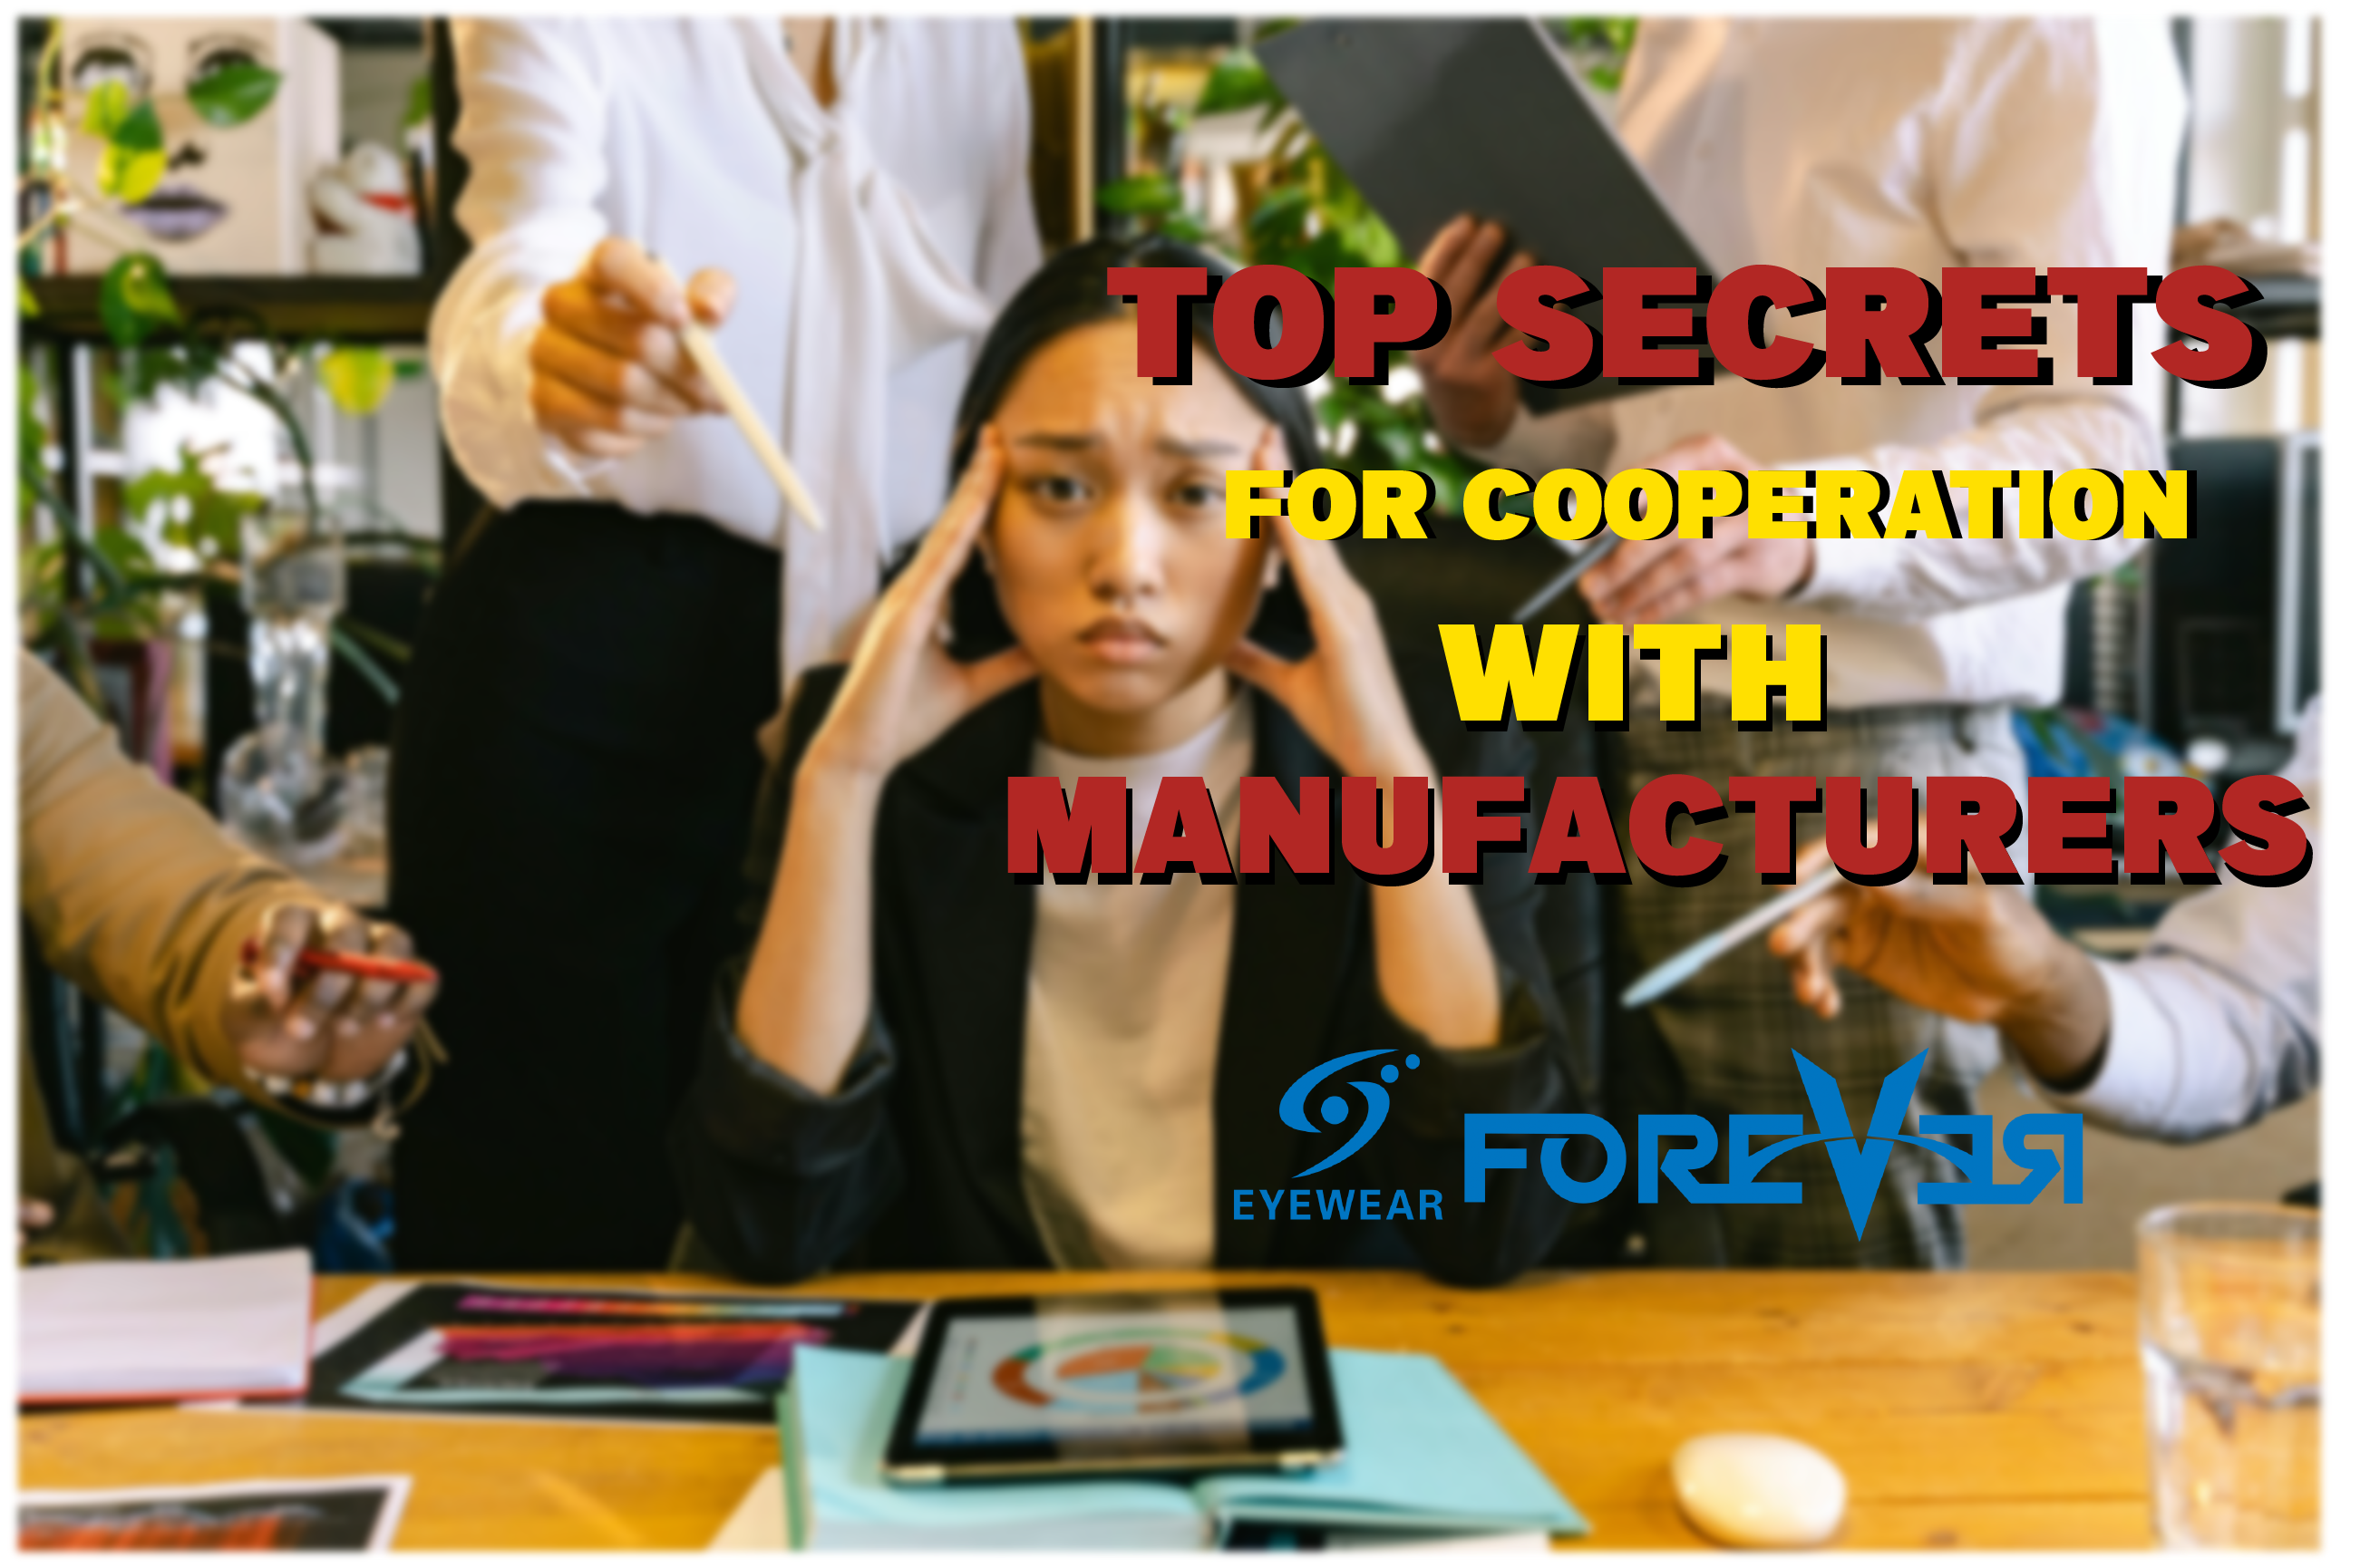 Top 5 Secrets for Better Cooperation with Eyeglasses Manufacturers